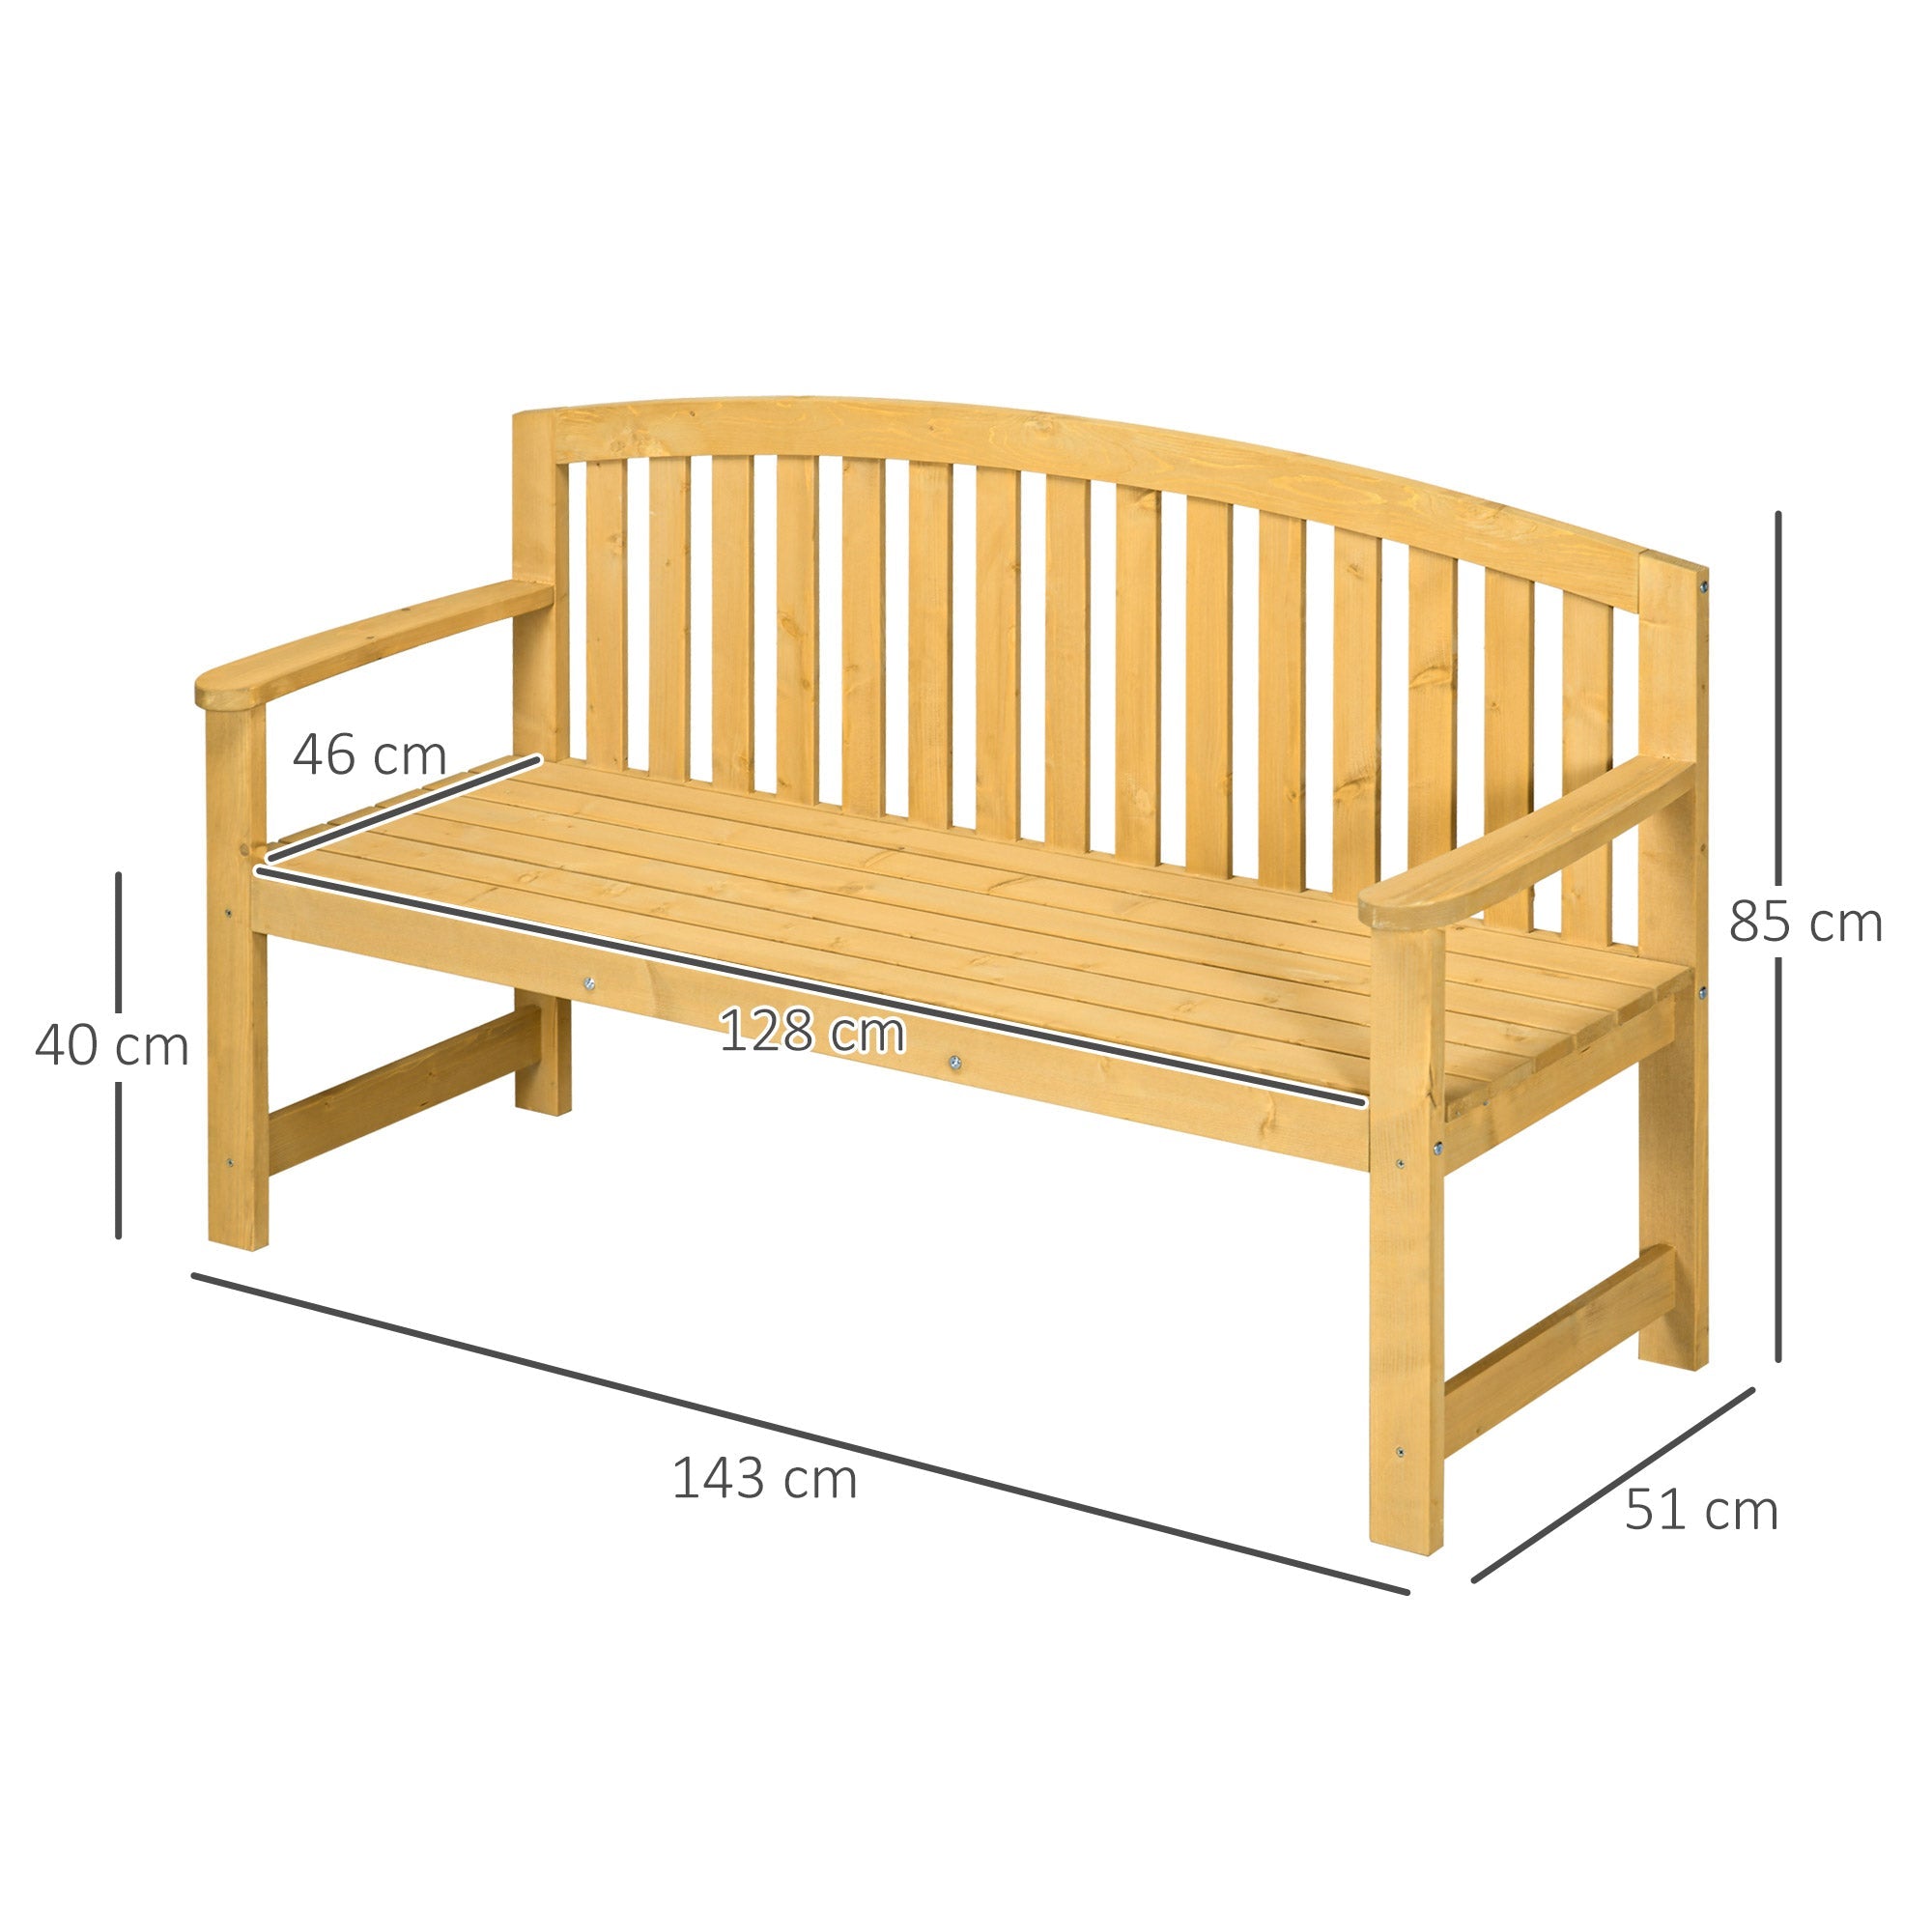 Outsunny 2 Seater Wooden Garden Bench with Armrest, Outdoor Furniture Chair for Park, Balcony, Orange - TovaHaus